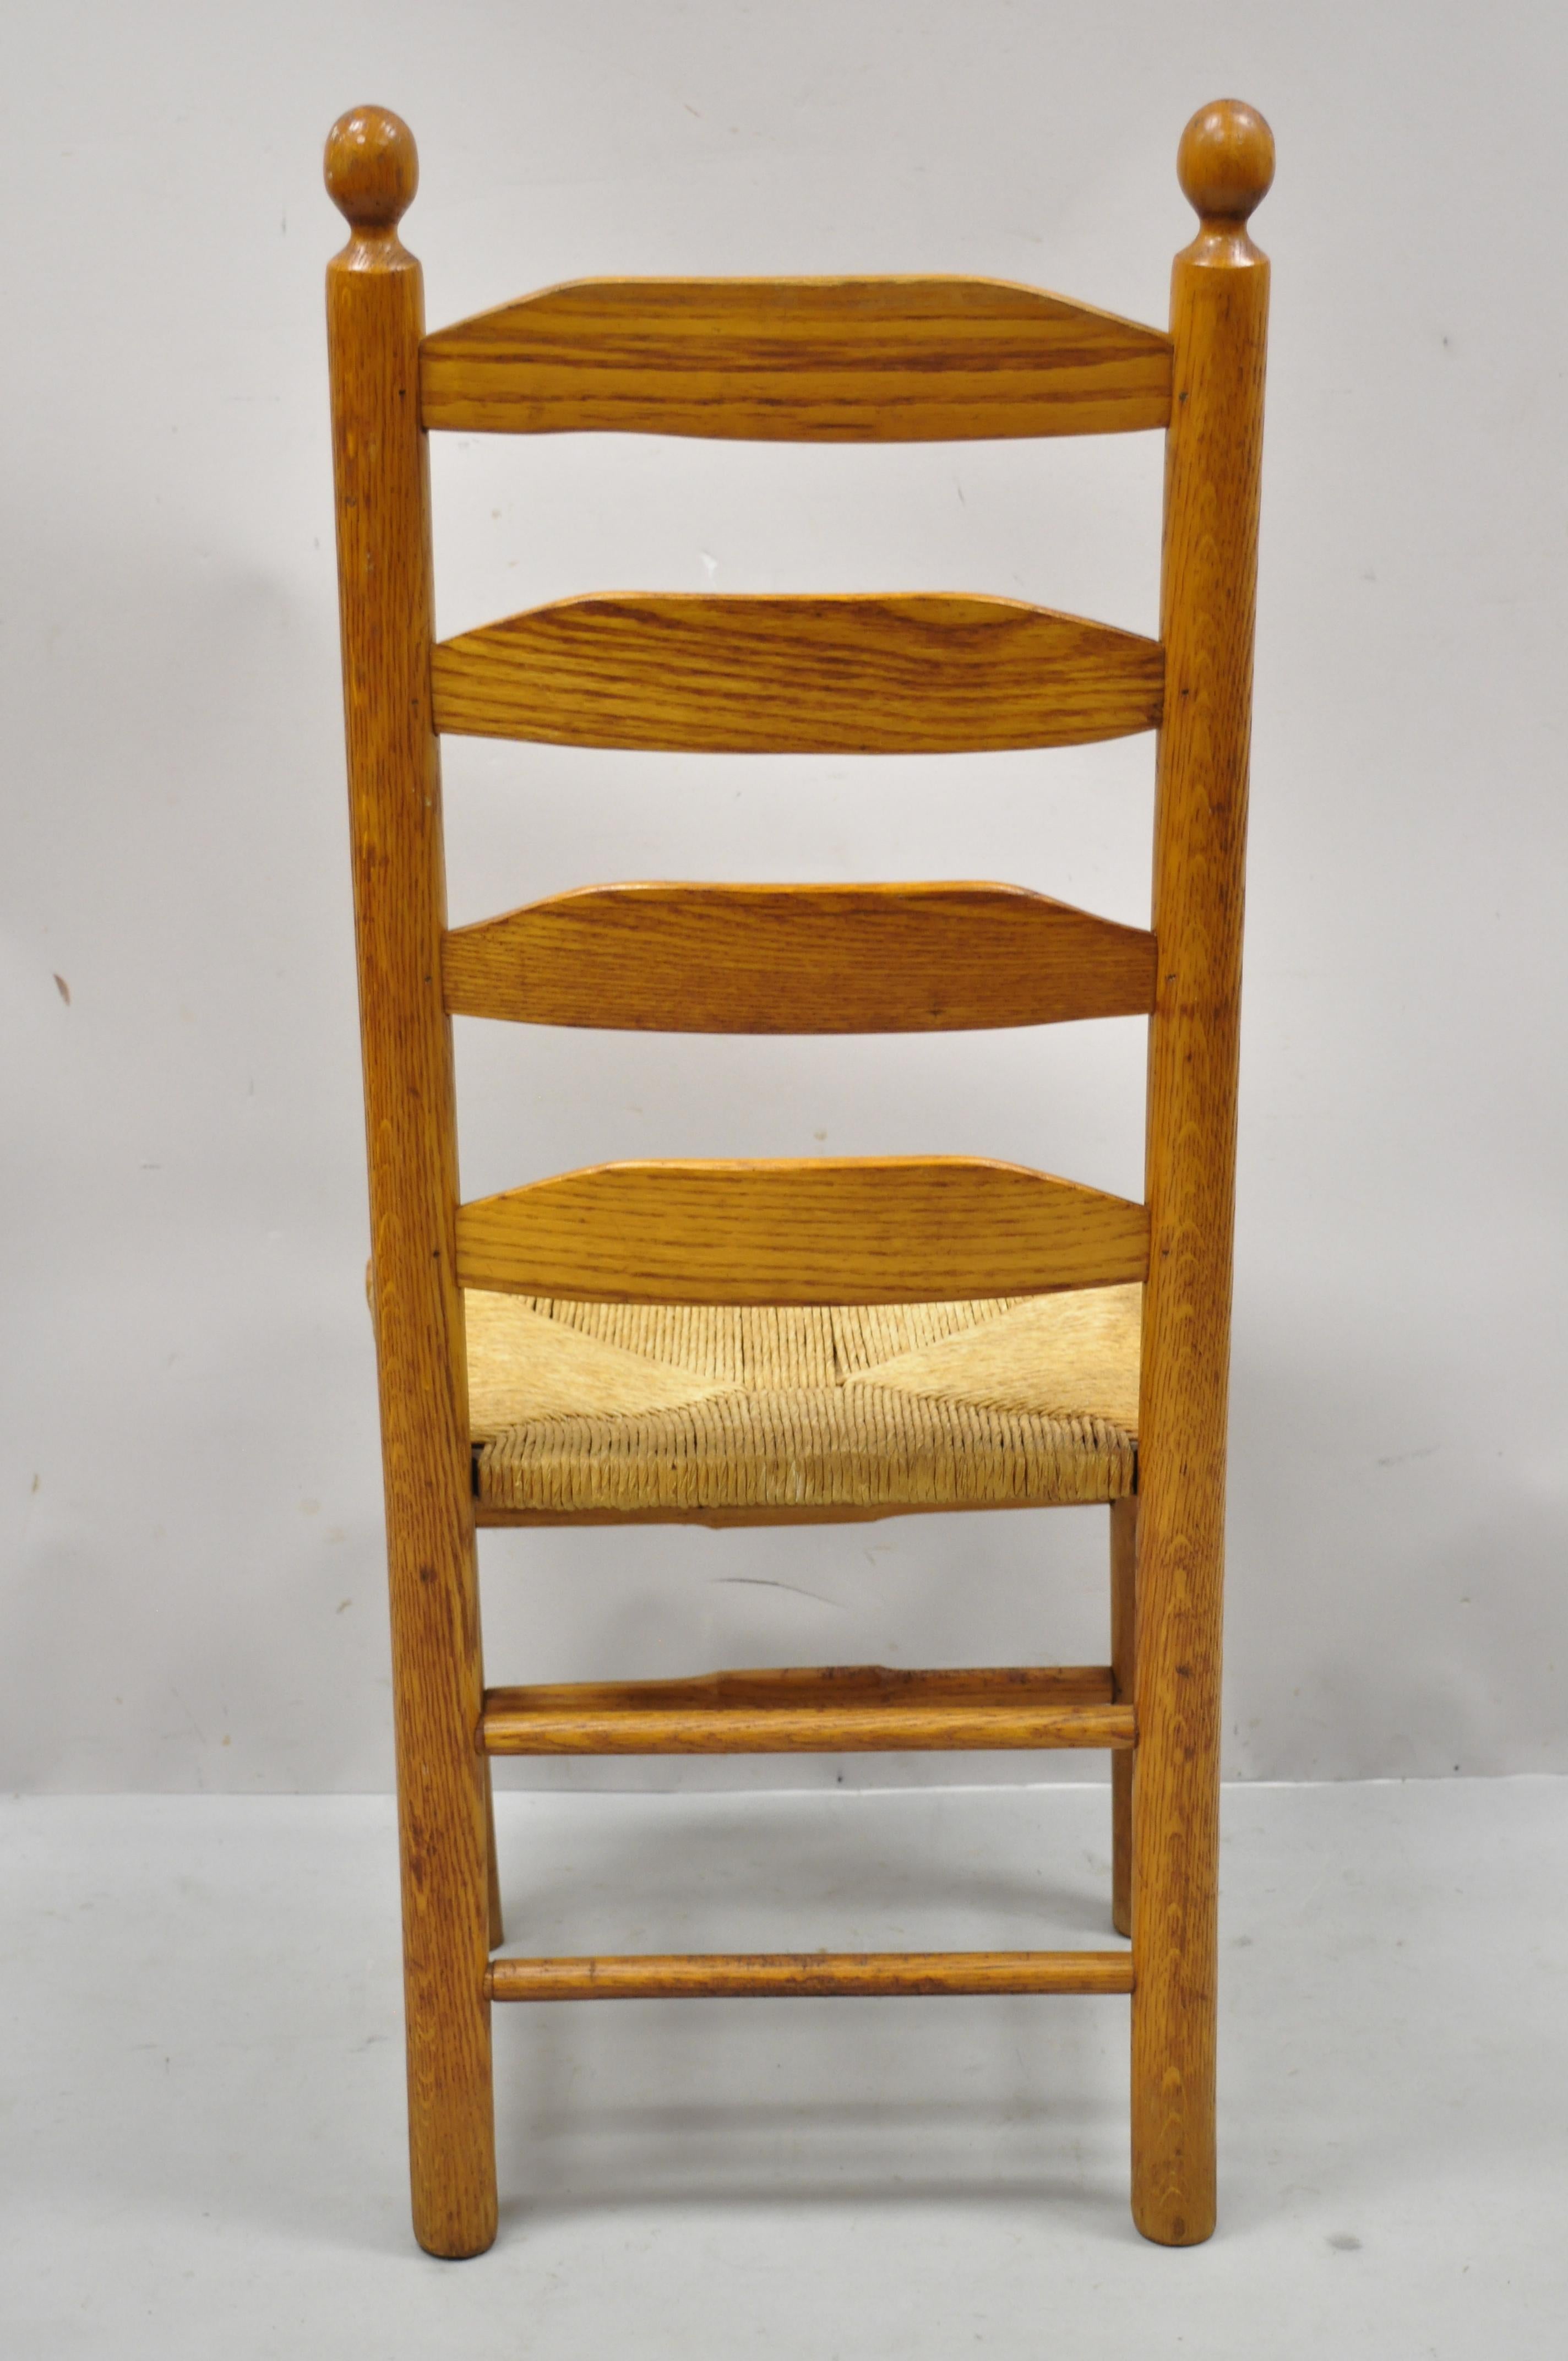 Vintage Oak Wood Rush Seat Tall Ladderback Dining Room Rustic Chairs, Set of 6 3